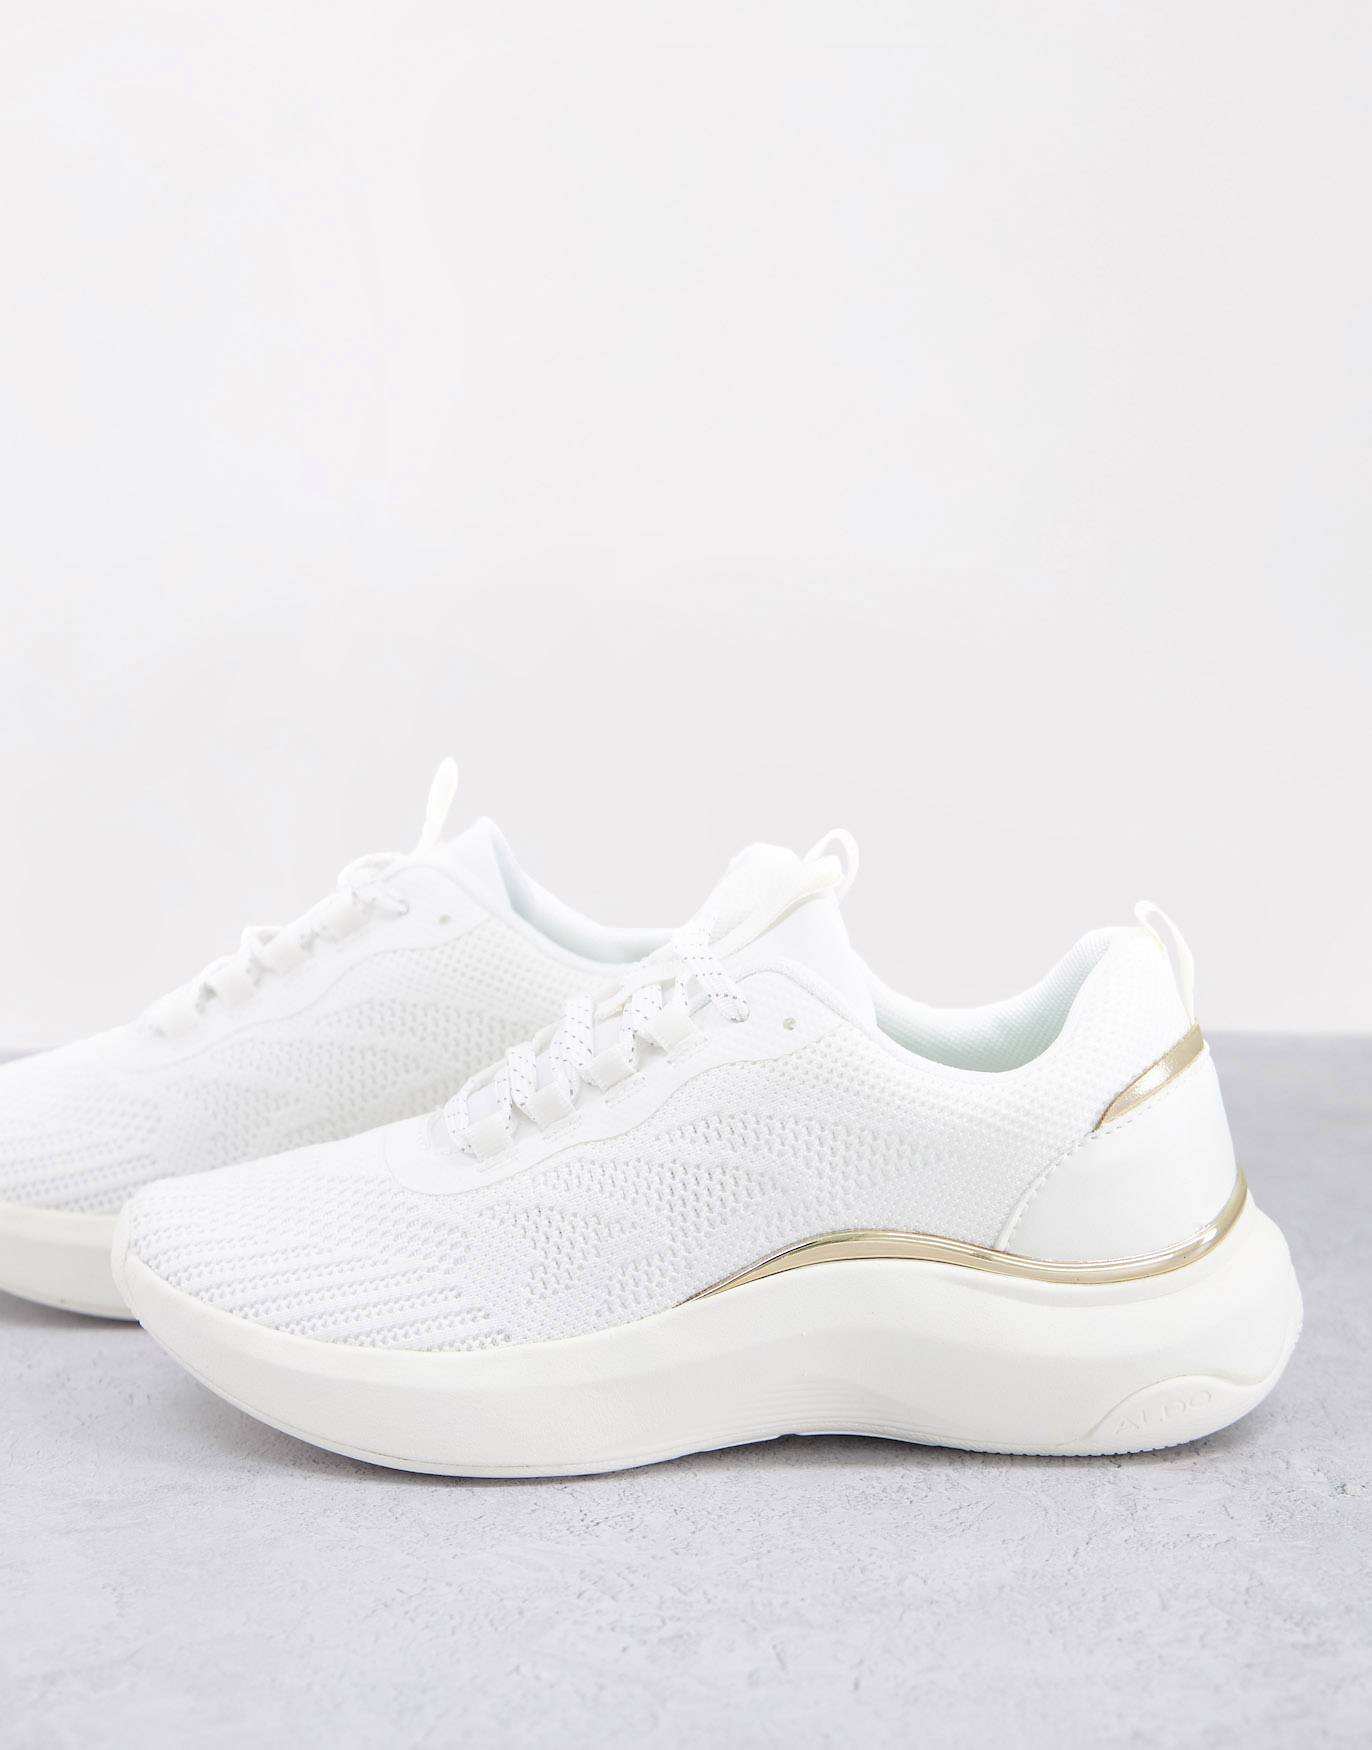 asos.com | ALDO Willo chunky trainers with gold details in white